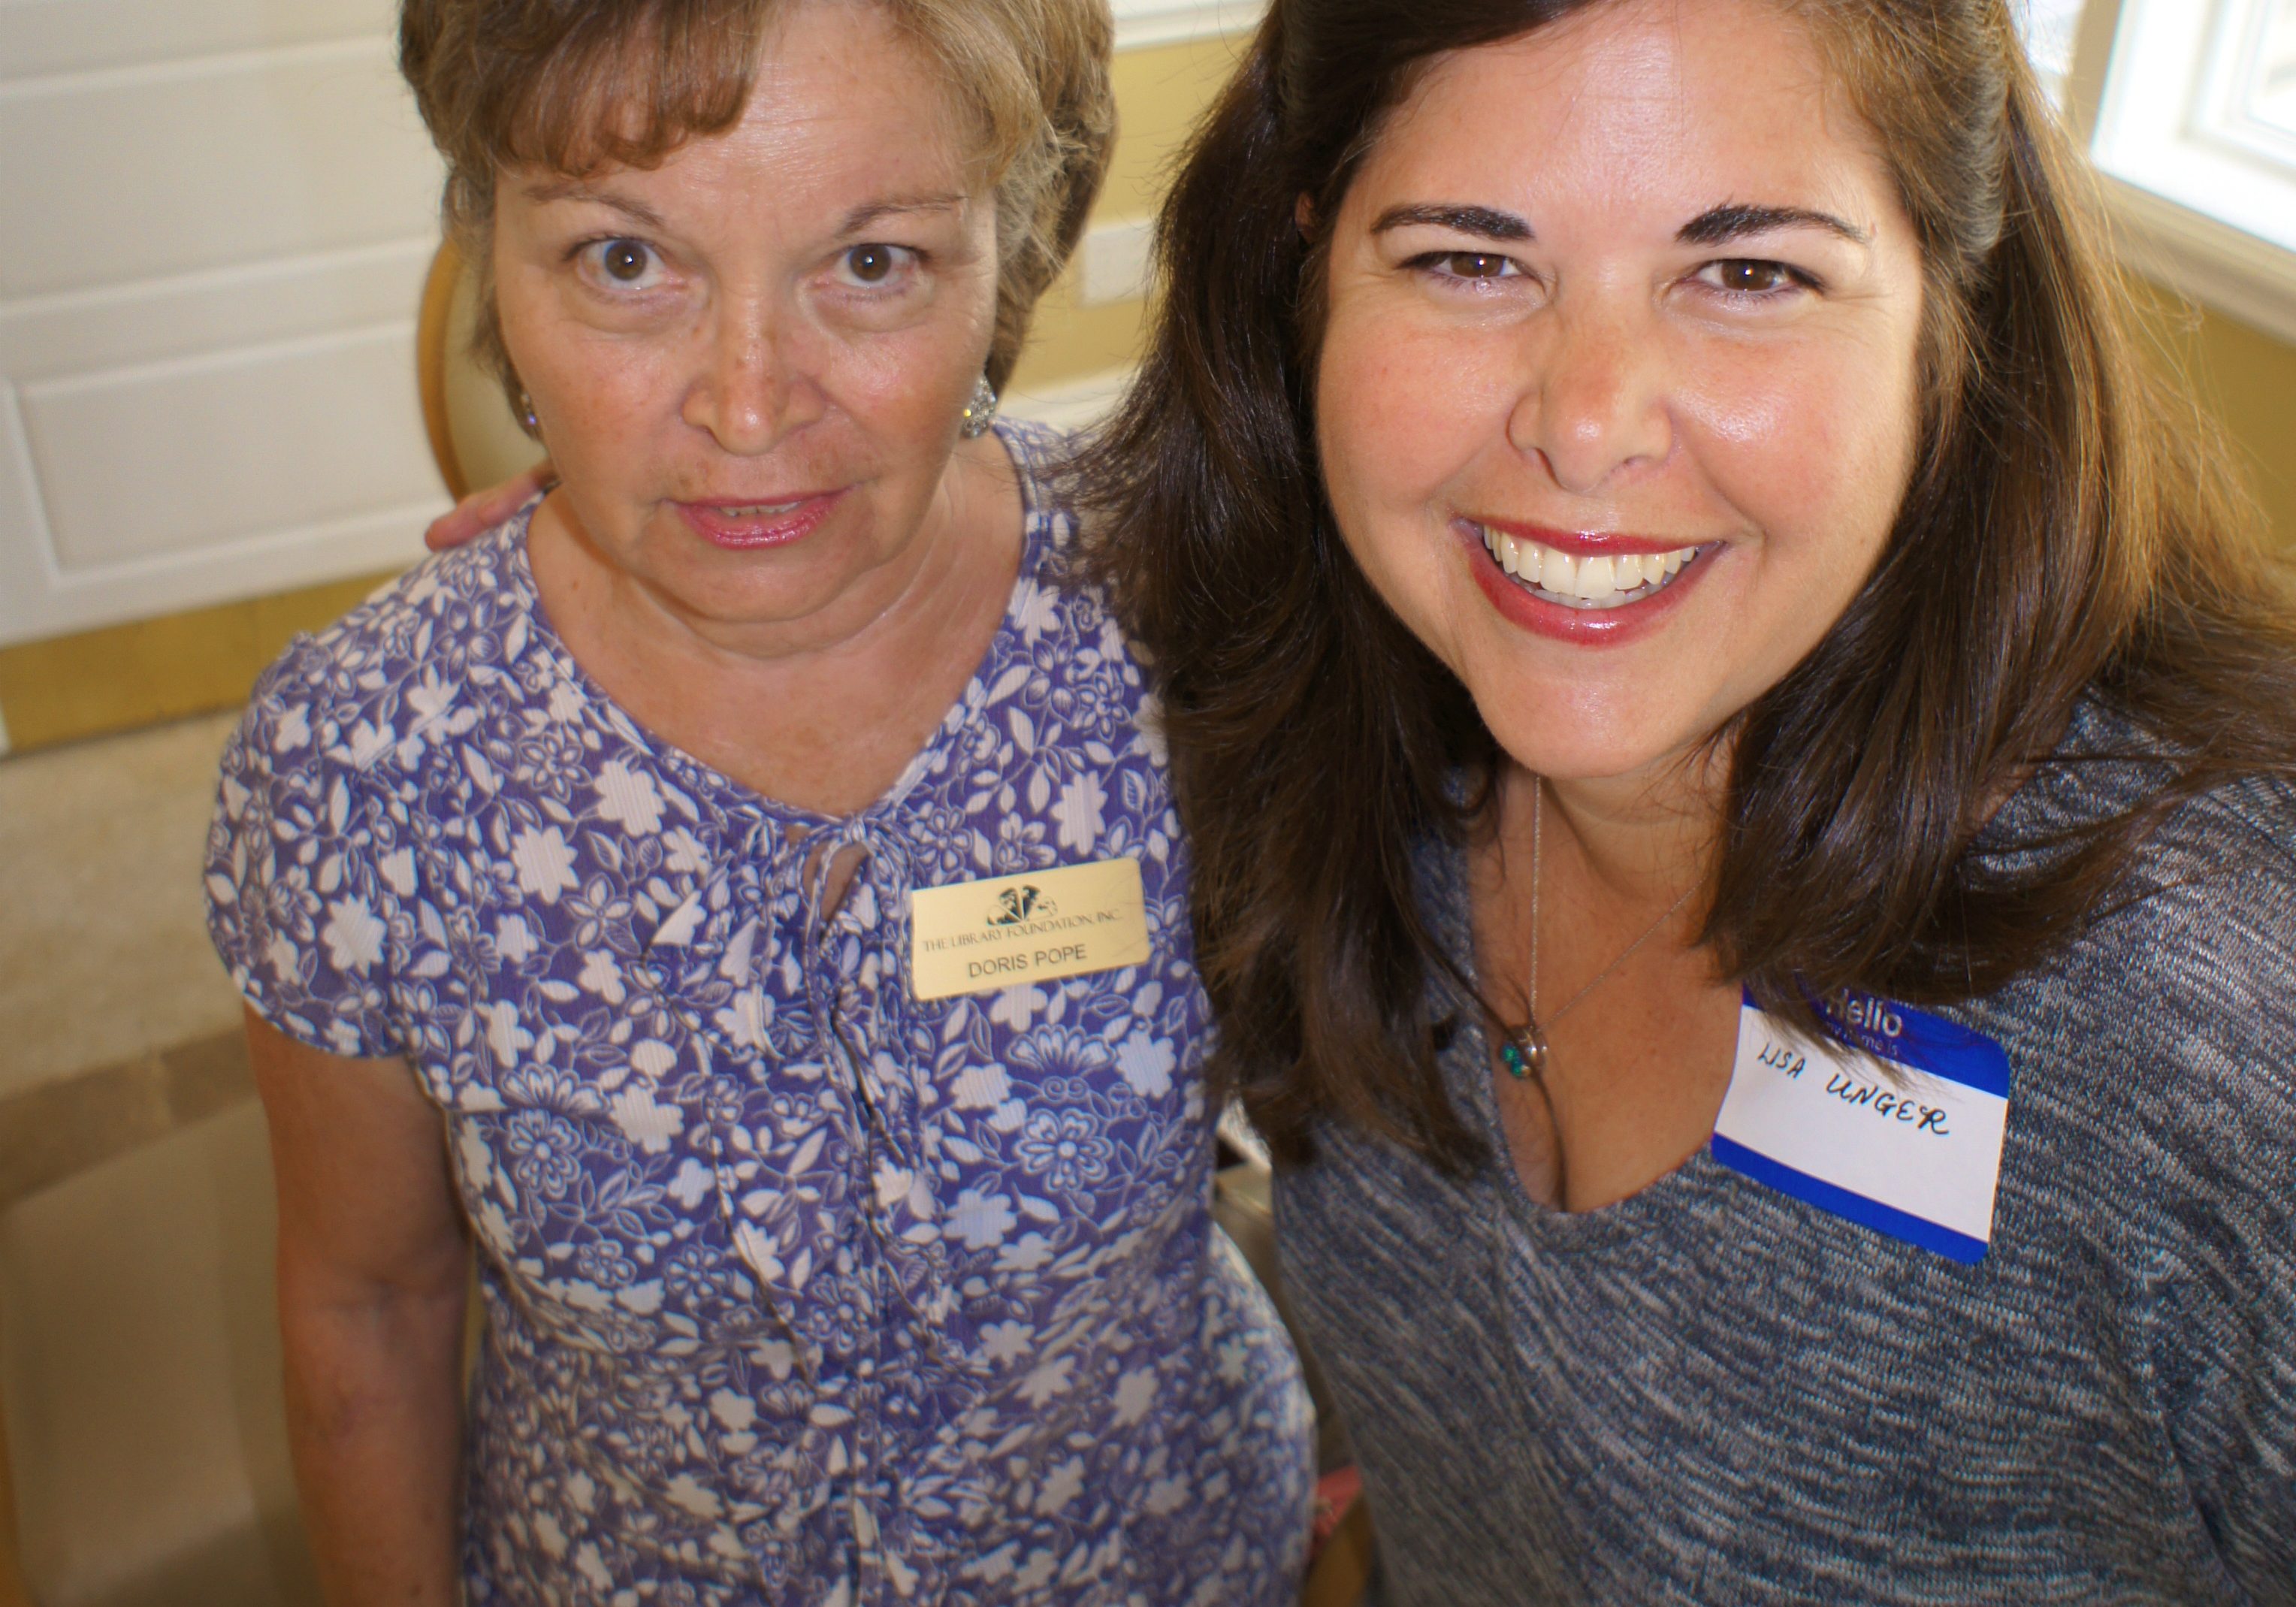 Doris Pope (The Library Foundation) & Lisa Unger at the Palmetto Riverside Bed and Breakfast reception. The Manatee County Library Foundation kicks off the 2015 Arts and Lecture Series with New York Times bestselling author Lisa Unger at the Manatee Performing Arts Center. Love of Books and Community. 